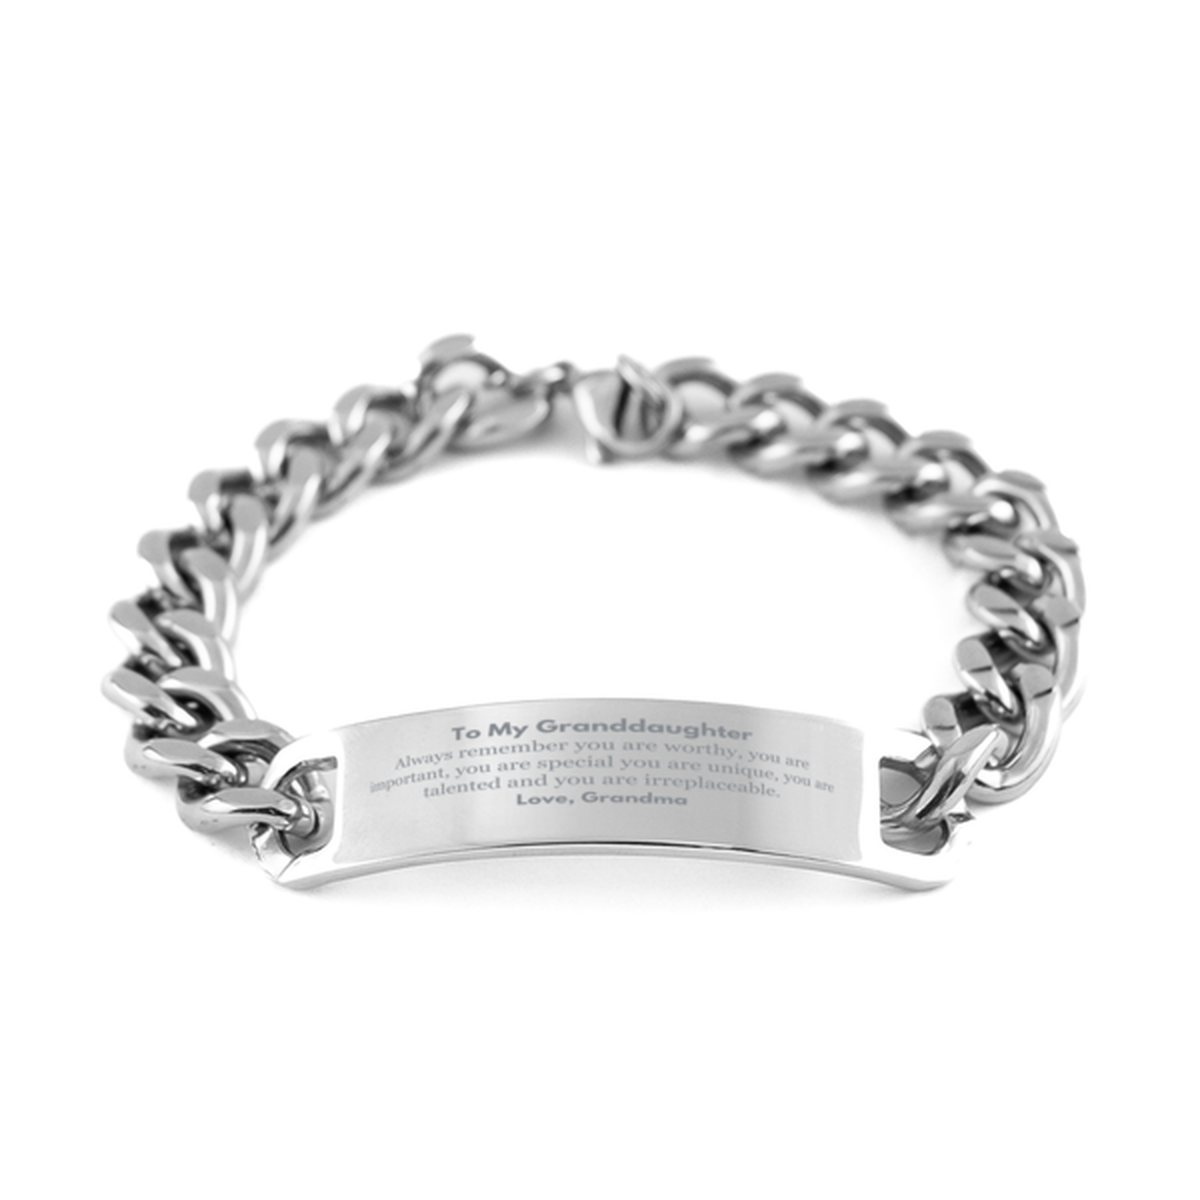 Granddaughter Birthday Gifts from Grandma, Inspirational Cuban Chain Stainless Steel Bracelet for Granddaughter Christmas Graduation Gifts for Granddaughter Always remember you are worthy, you are important. Love, Grandma